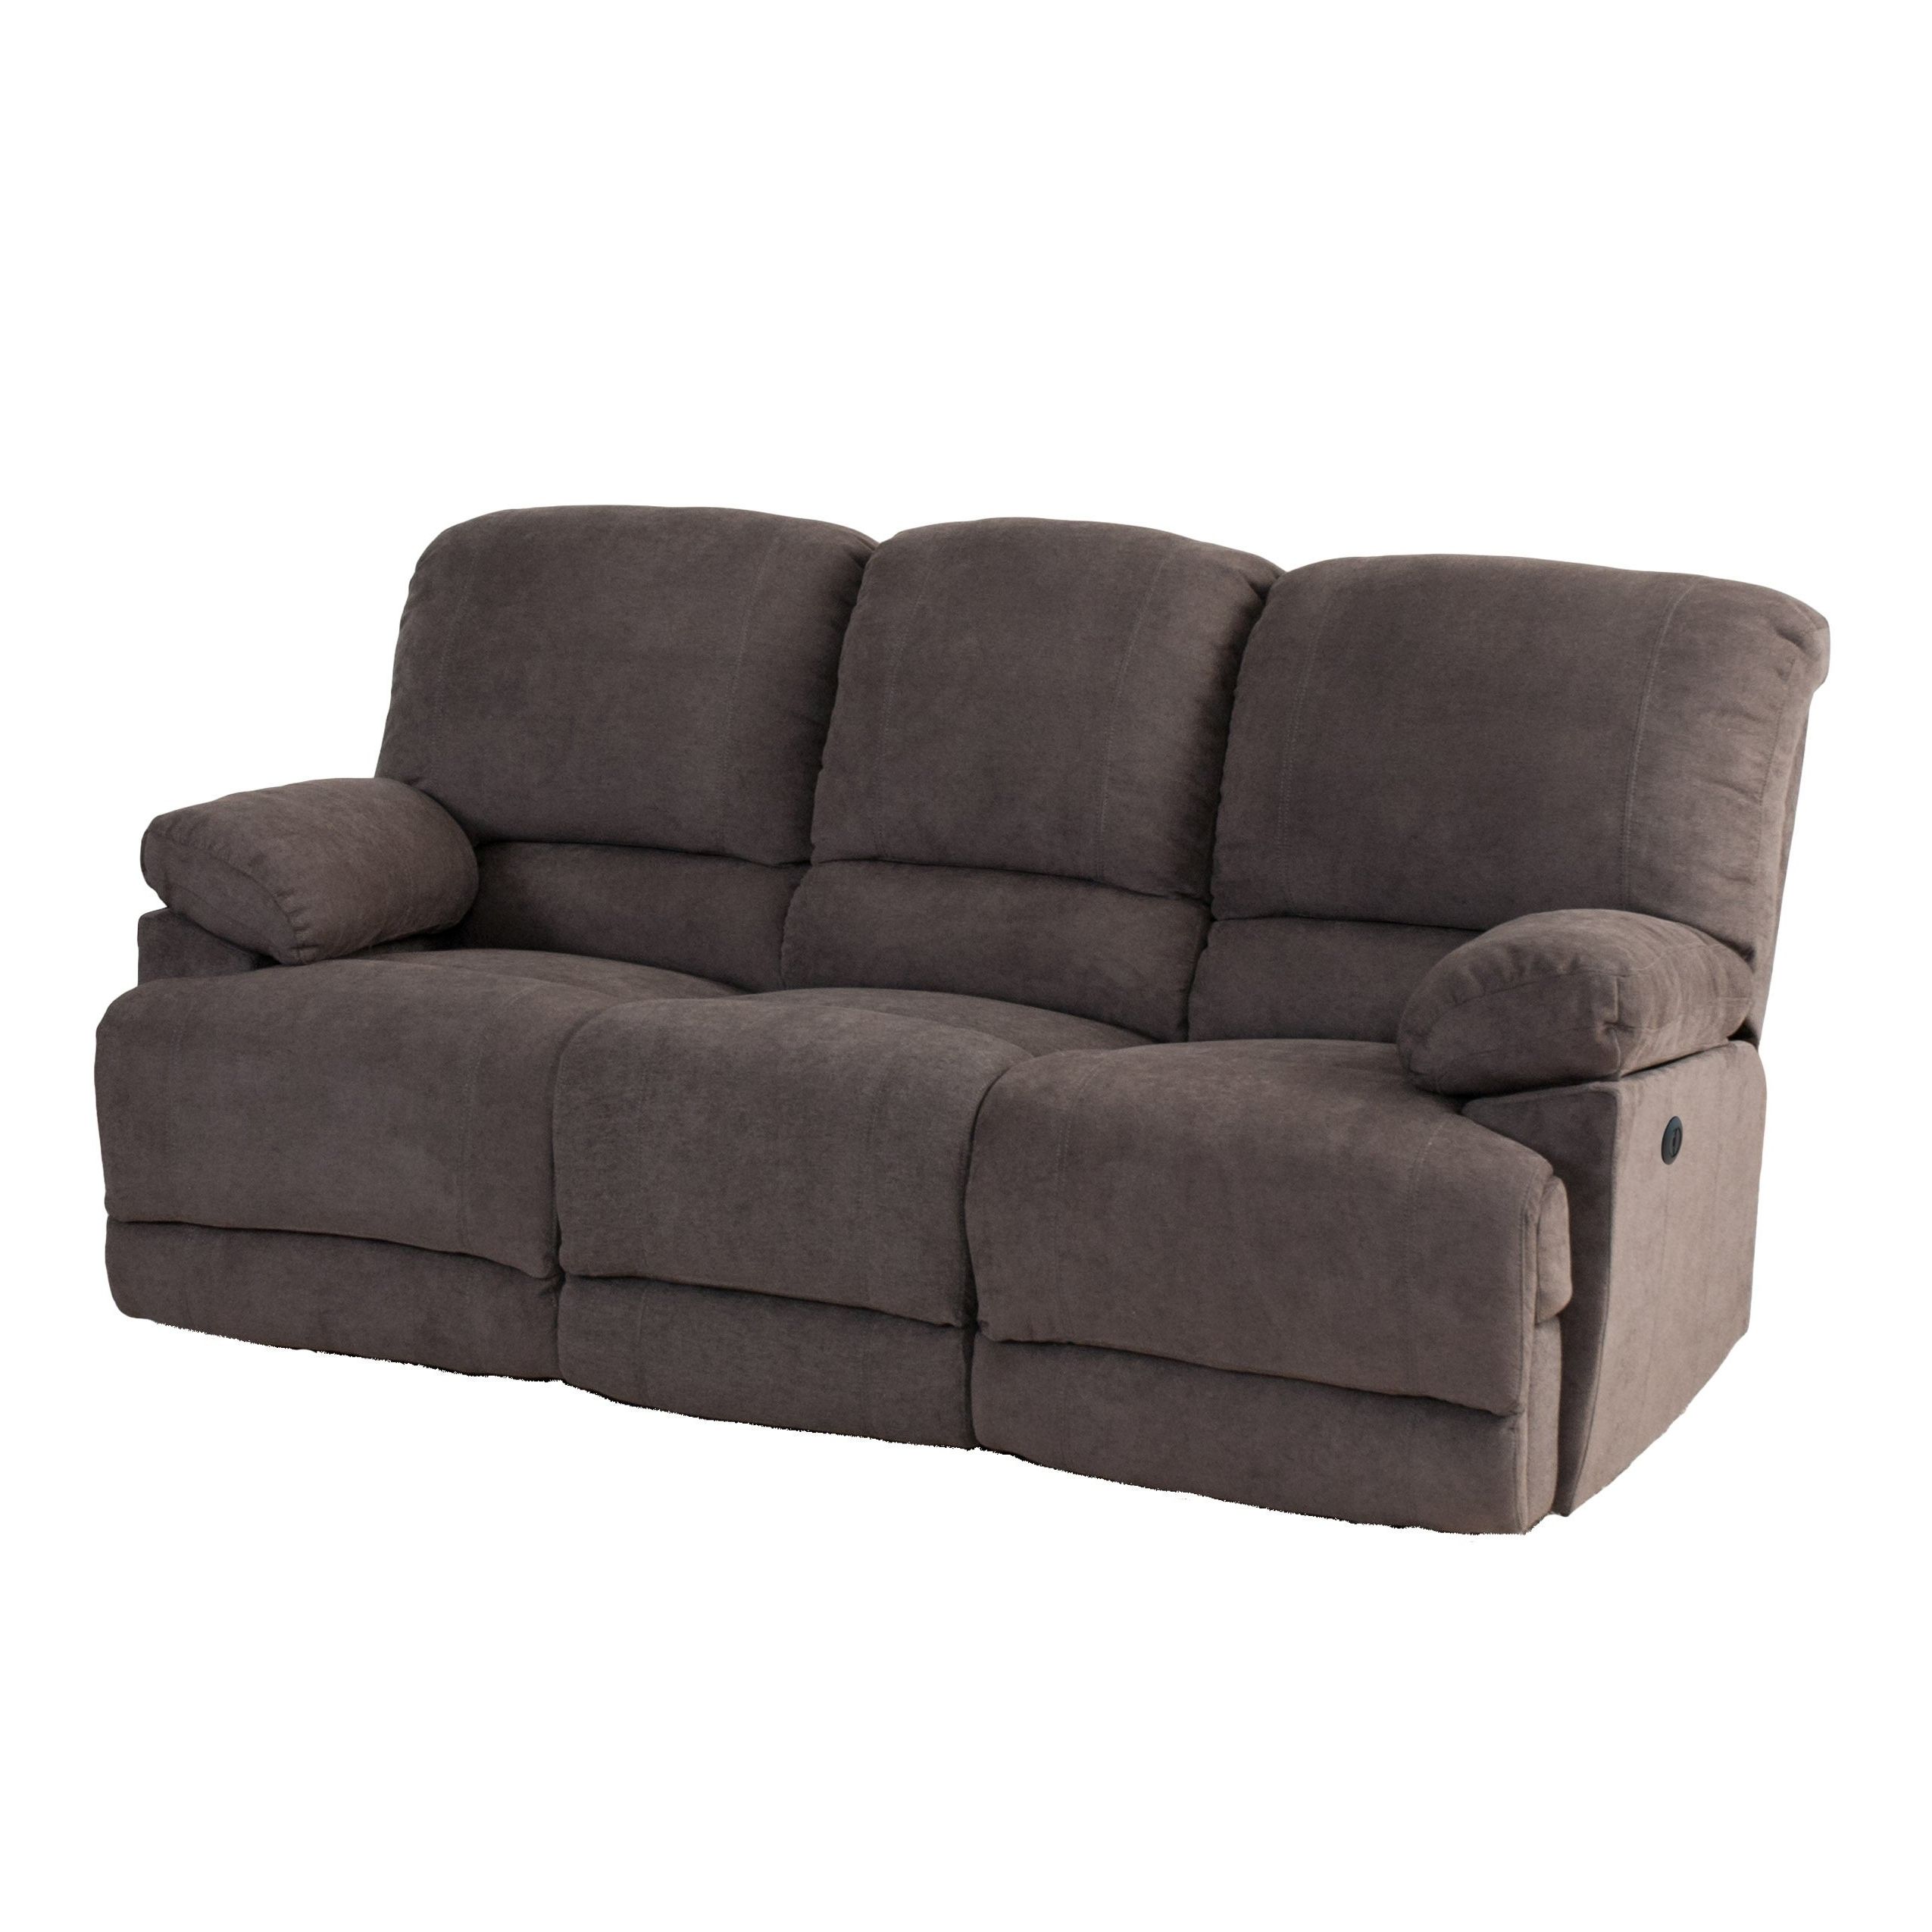 Widely Used Chenille Fabric Power Reclining Sofa With Usb Port (View 11 of 20)